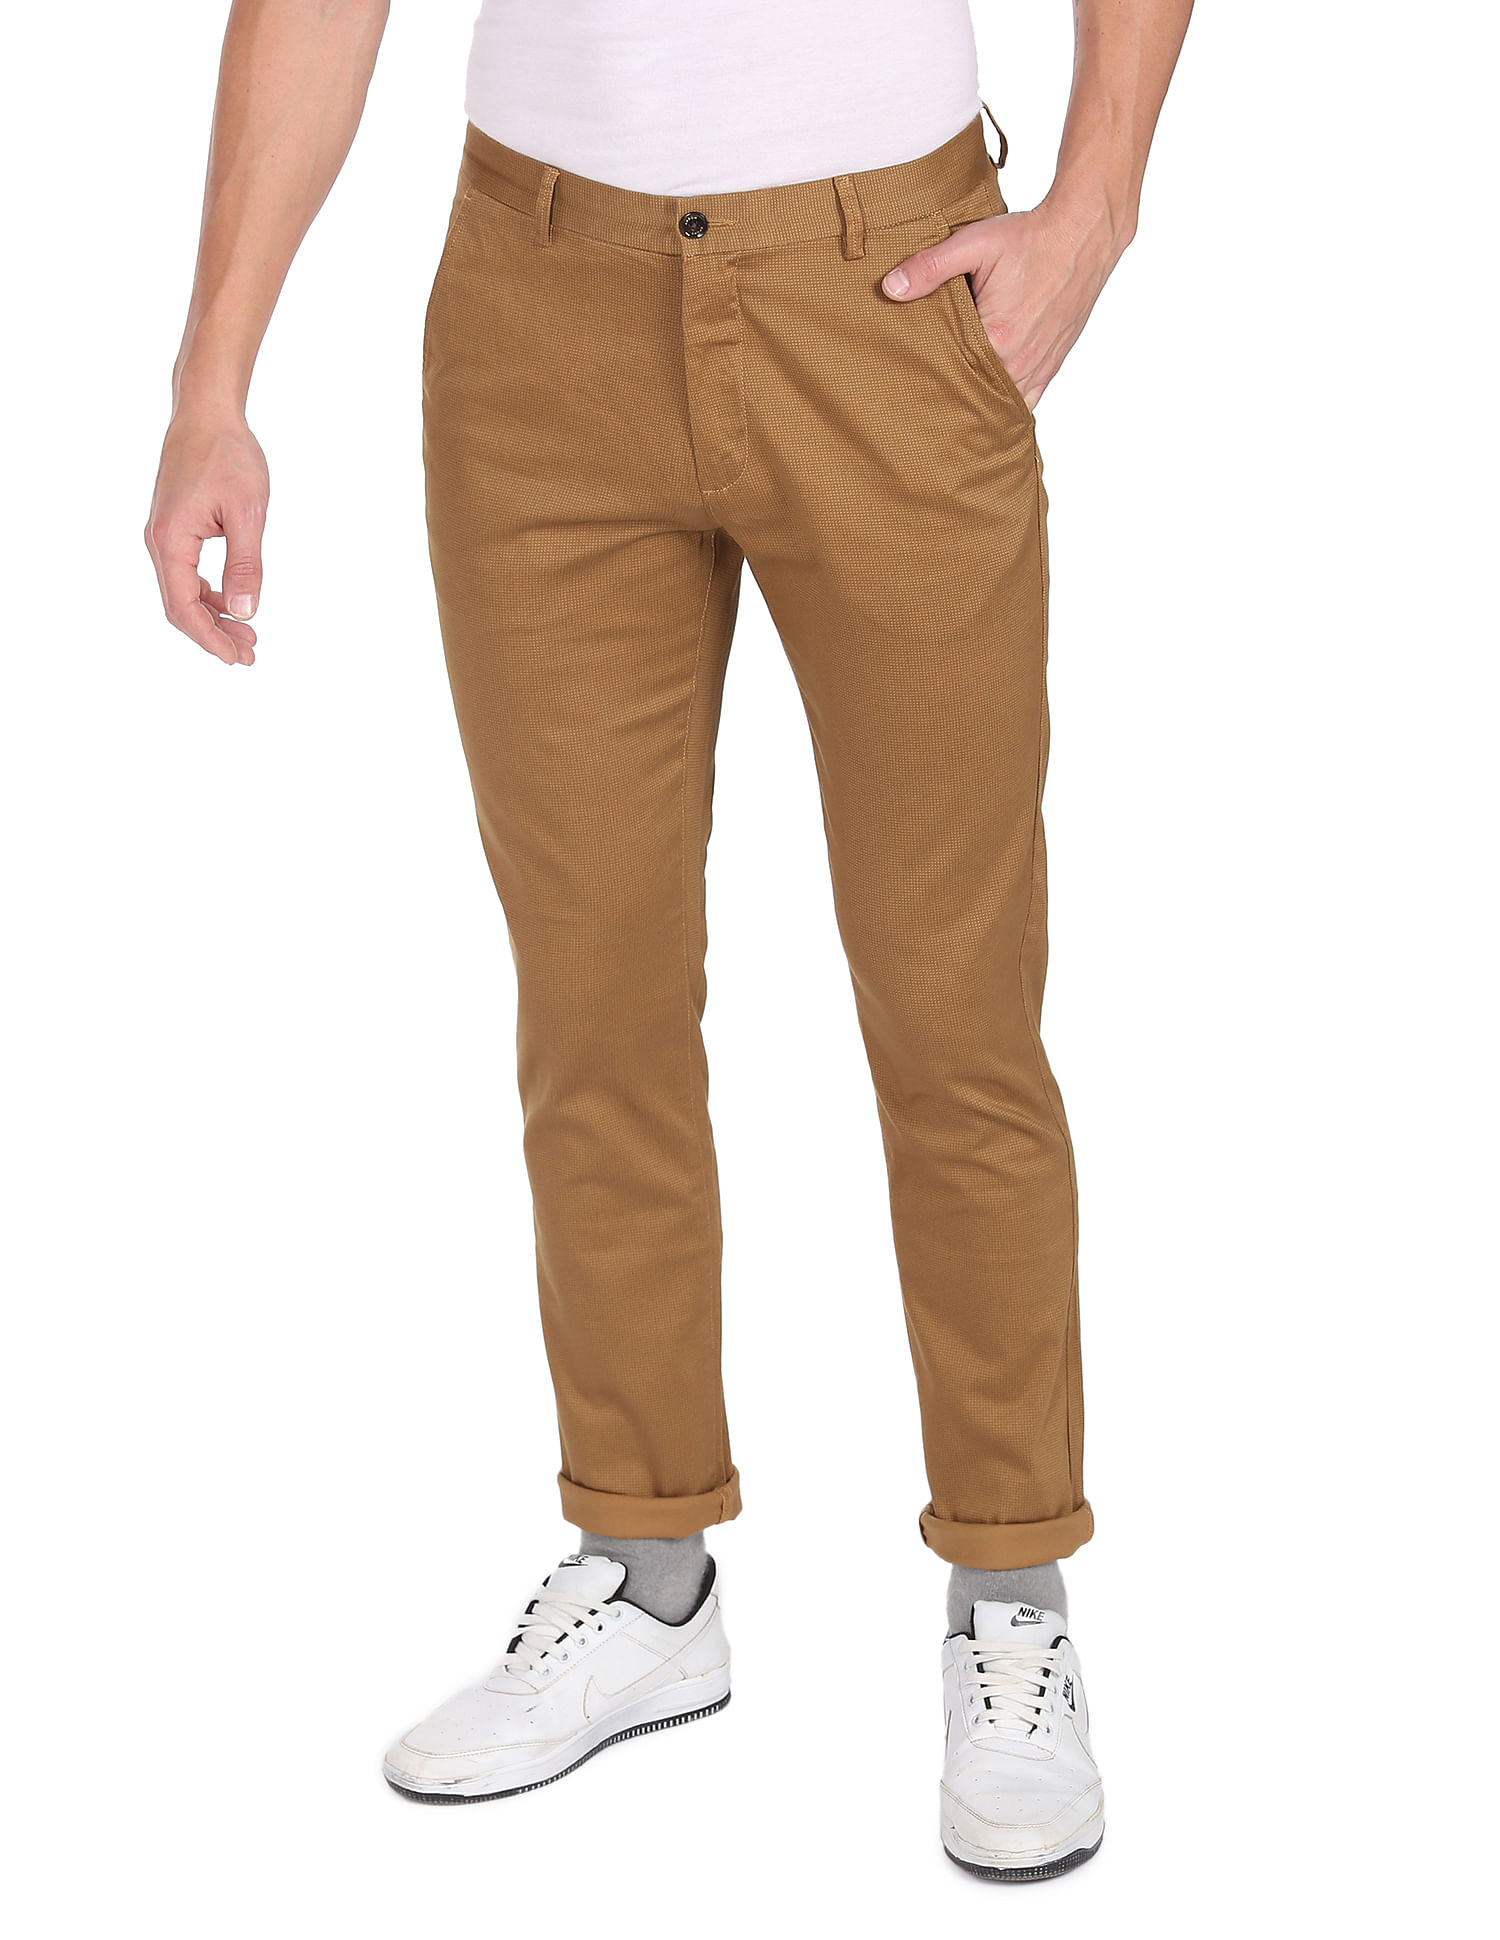 Cotton Formal Wear Mens Trousers at Rs 1000 in Nagpur | ID: 12263925391